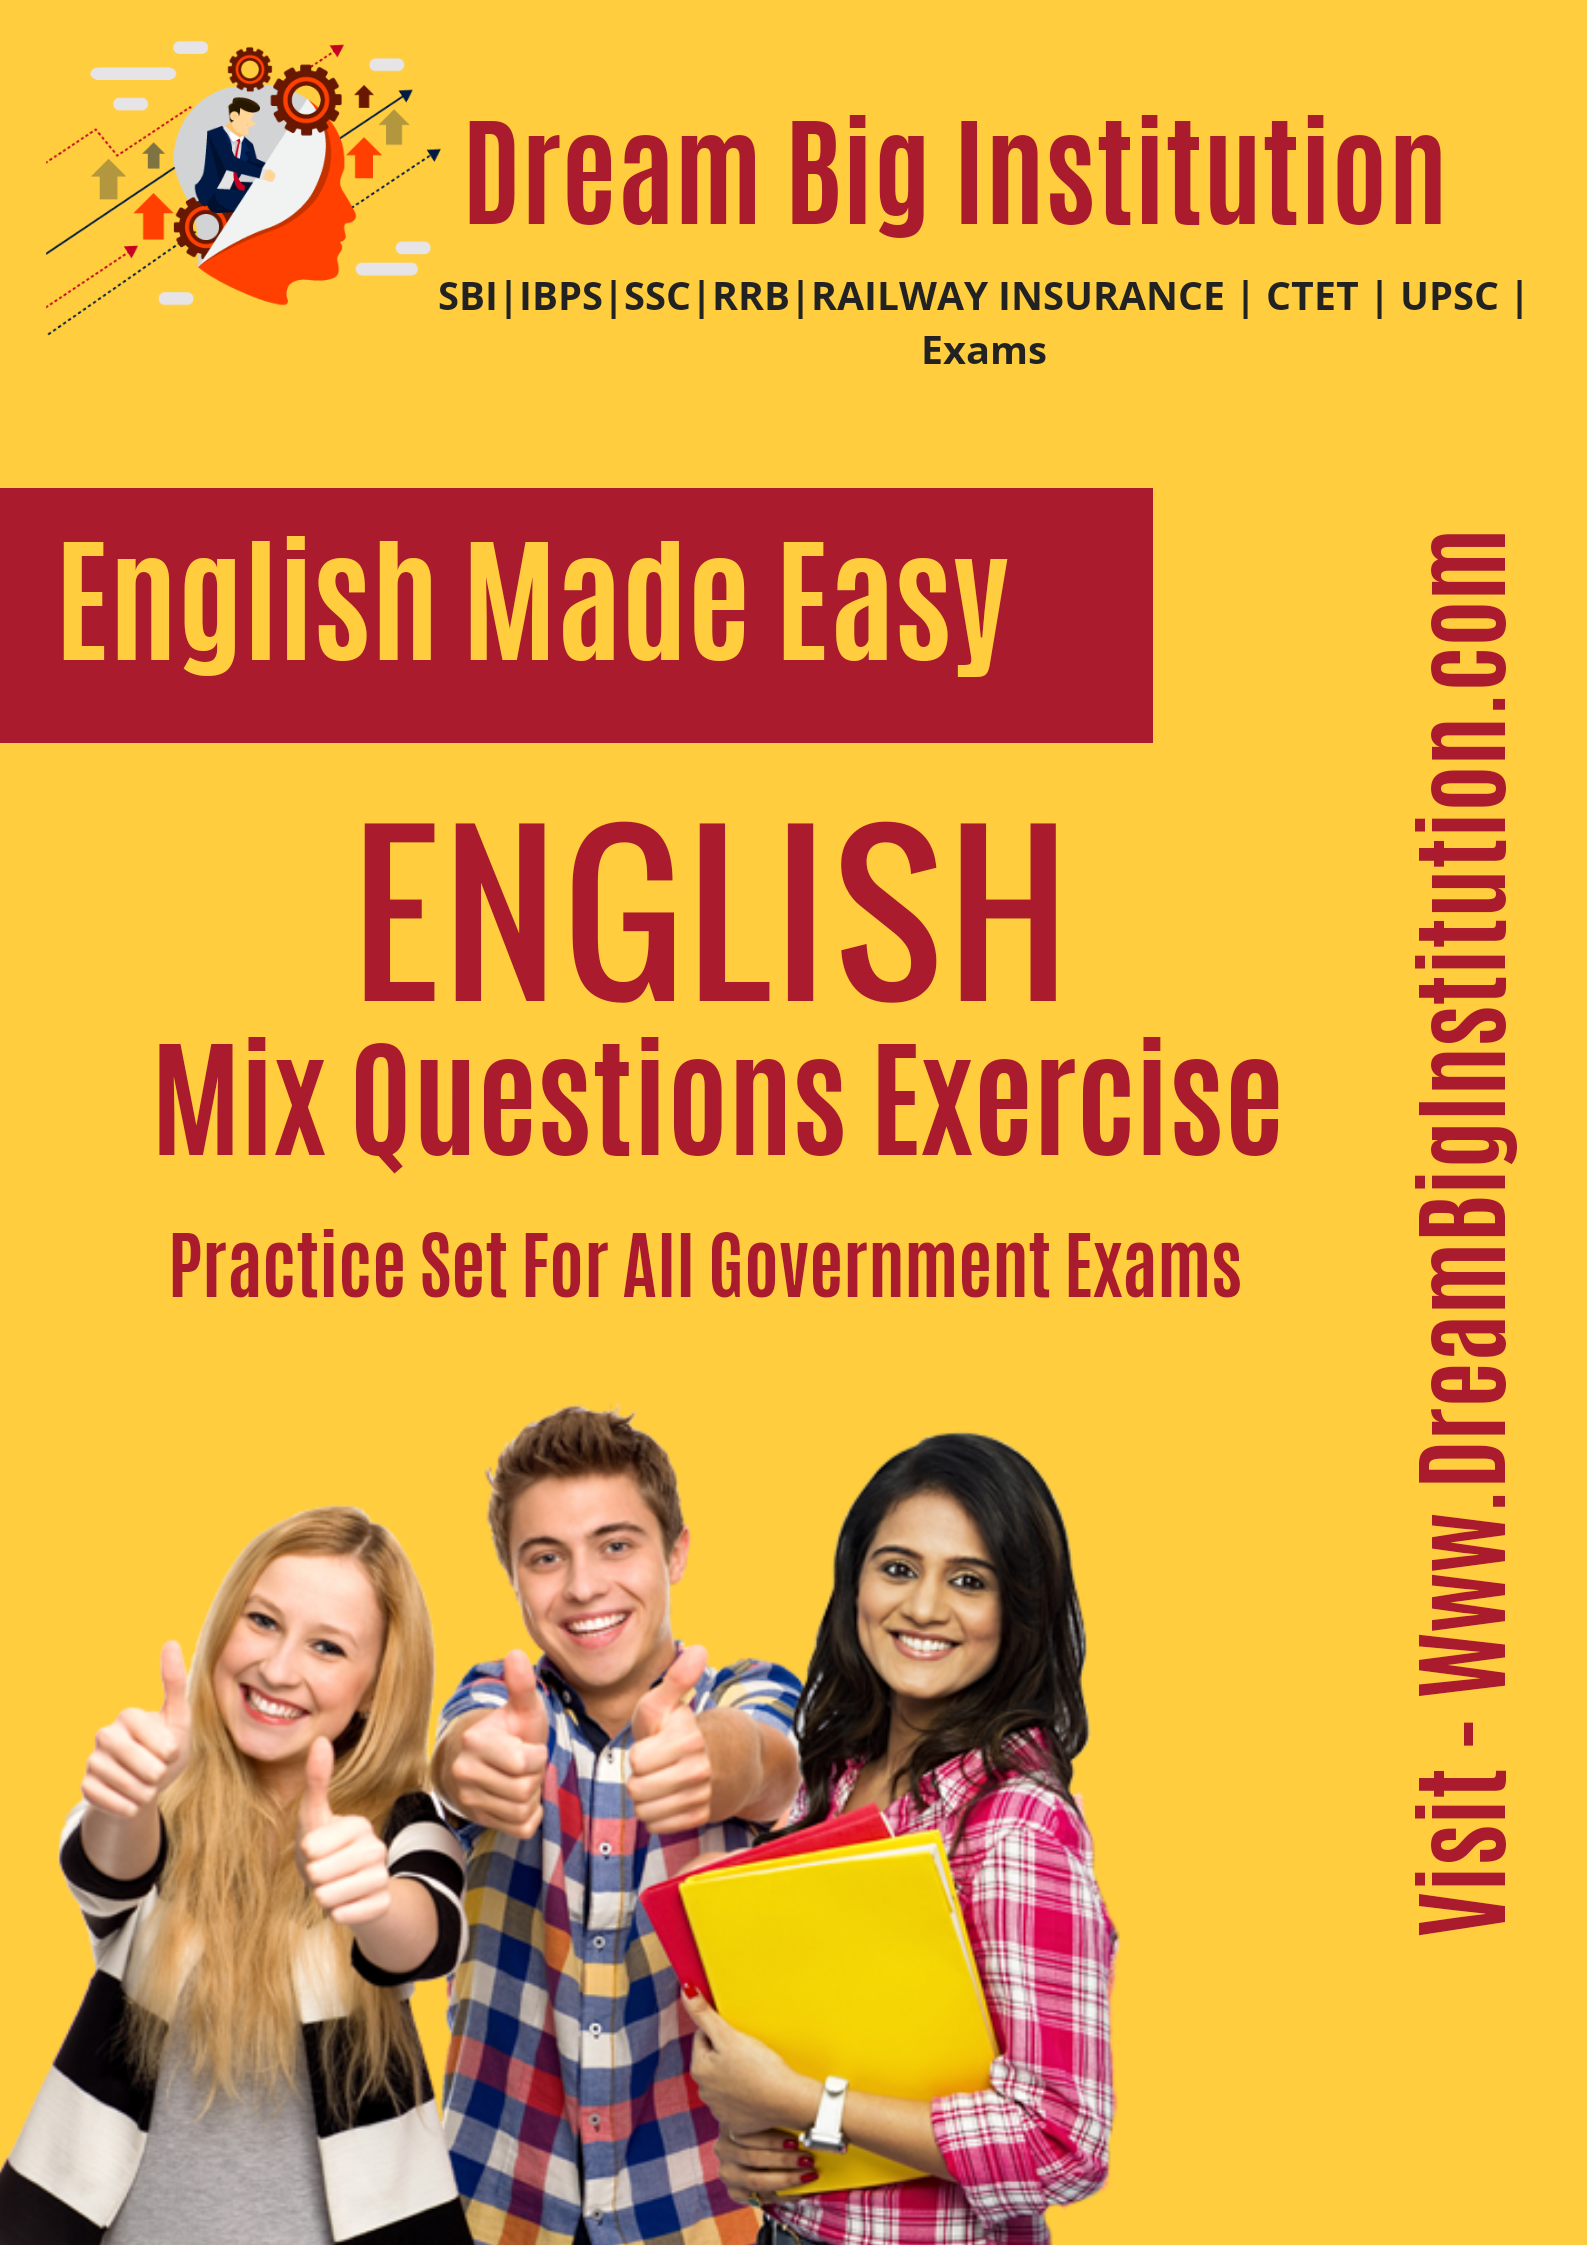 New Pattern English Questions PDF for Competitive Exams

